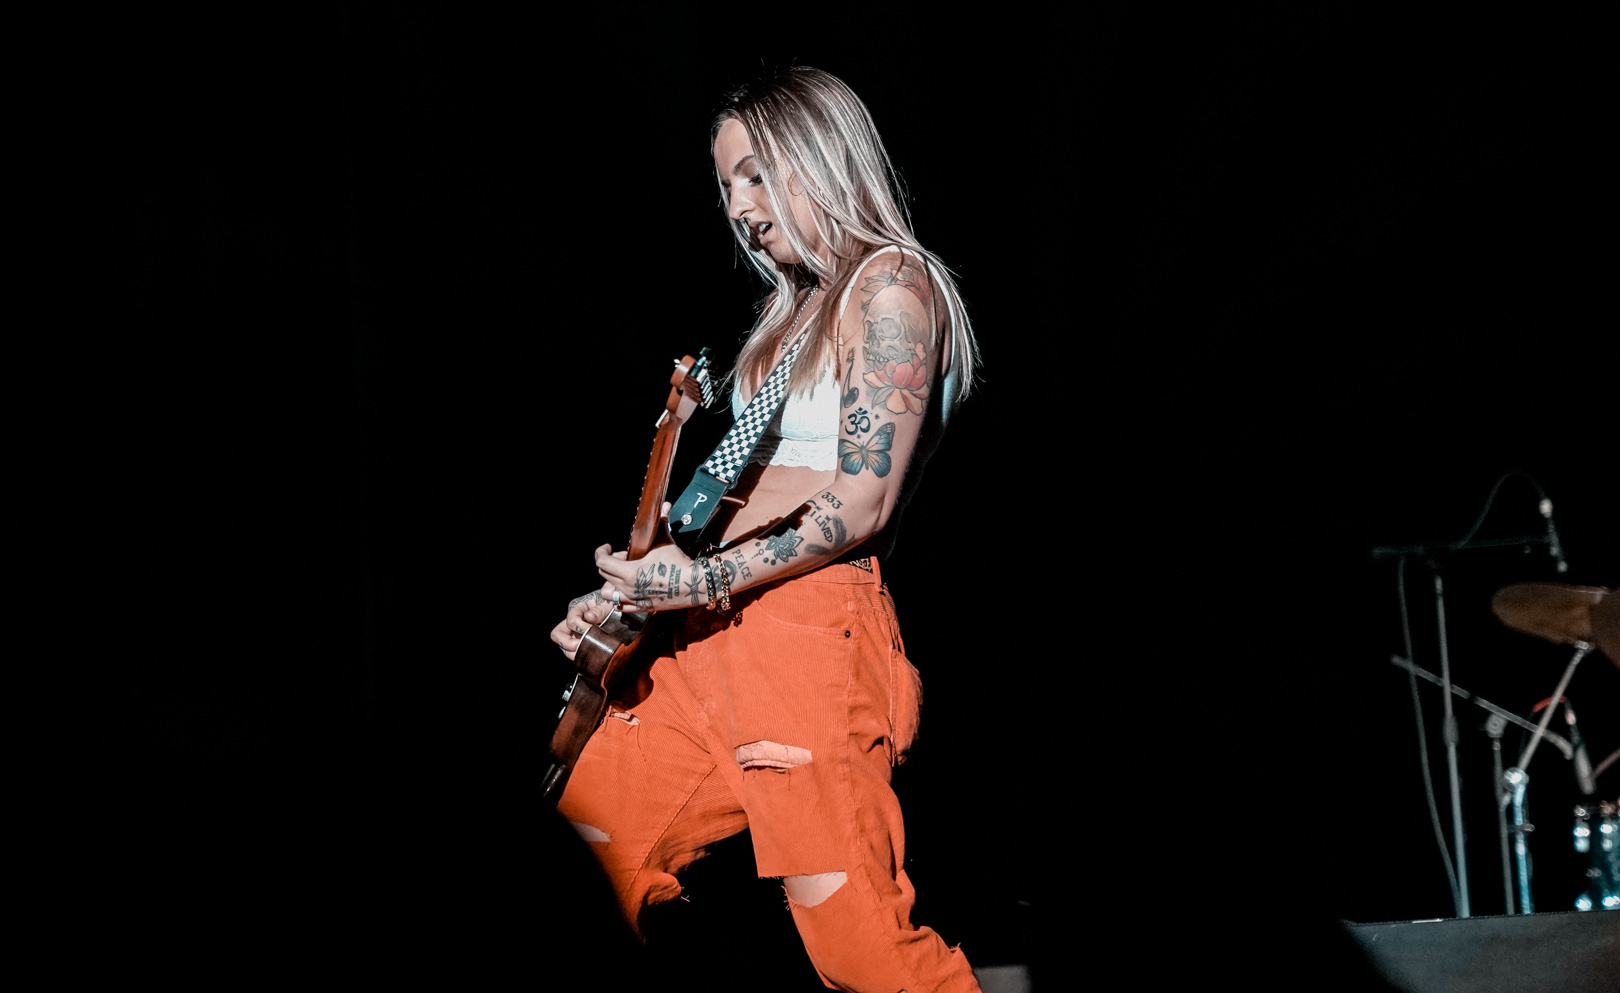 A woman plays guitar on stage